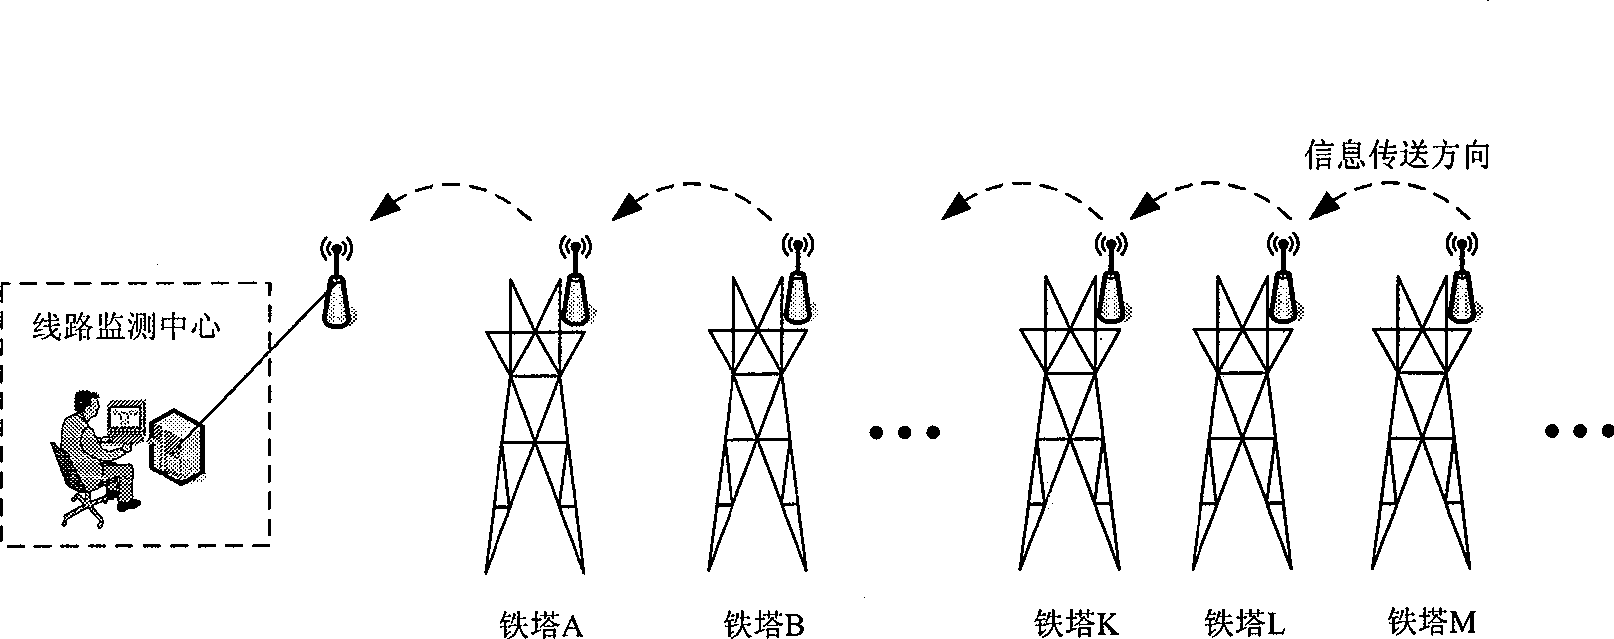 High voltage electricity transmission line monitoring method based on wireless communication and optical communication